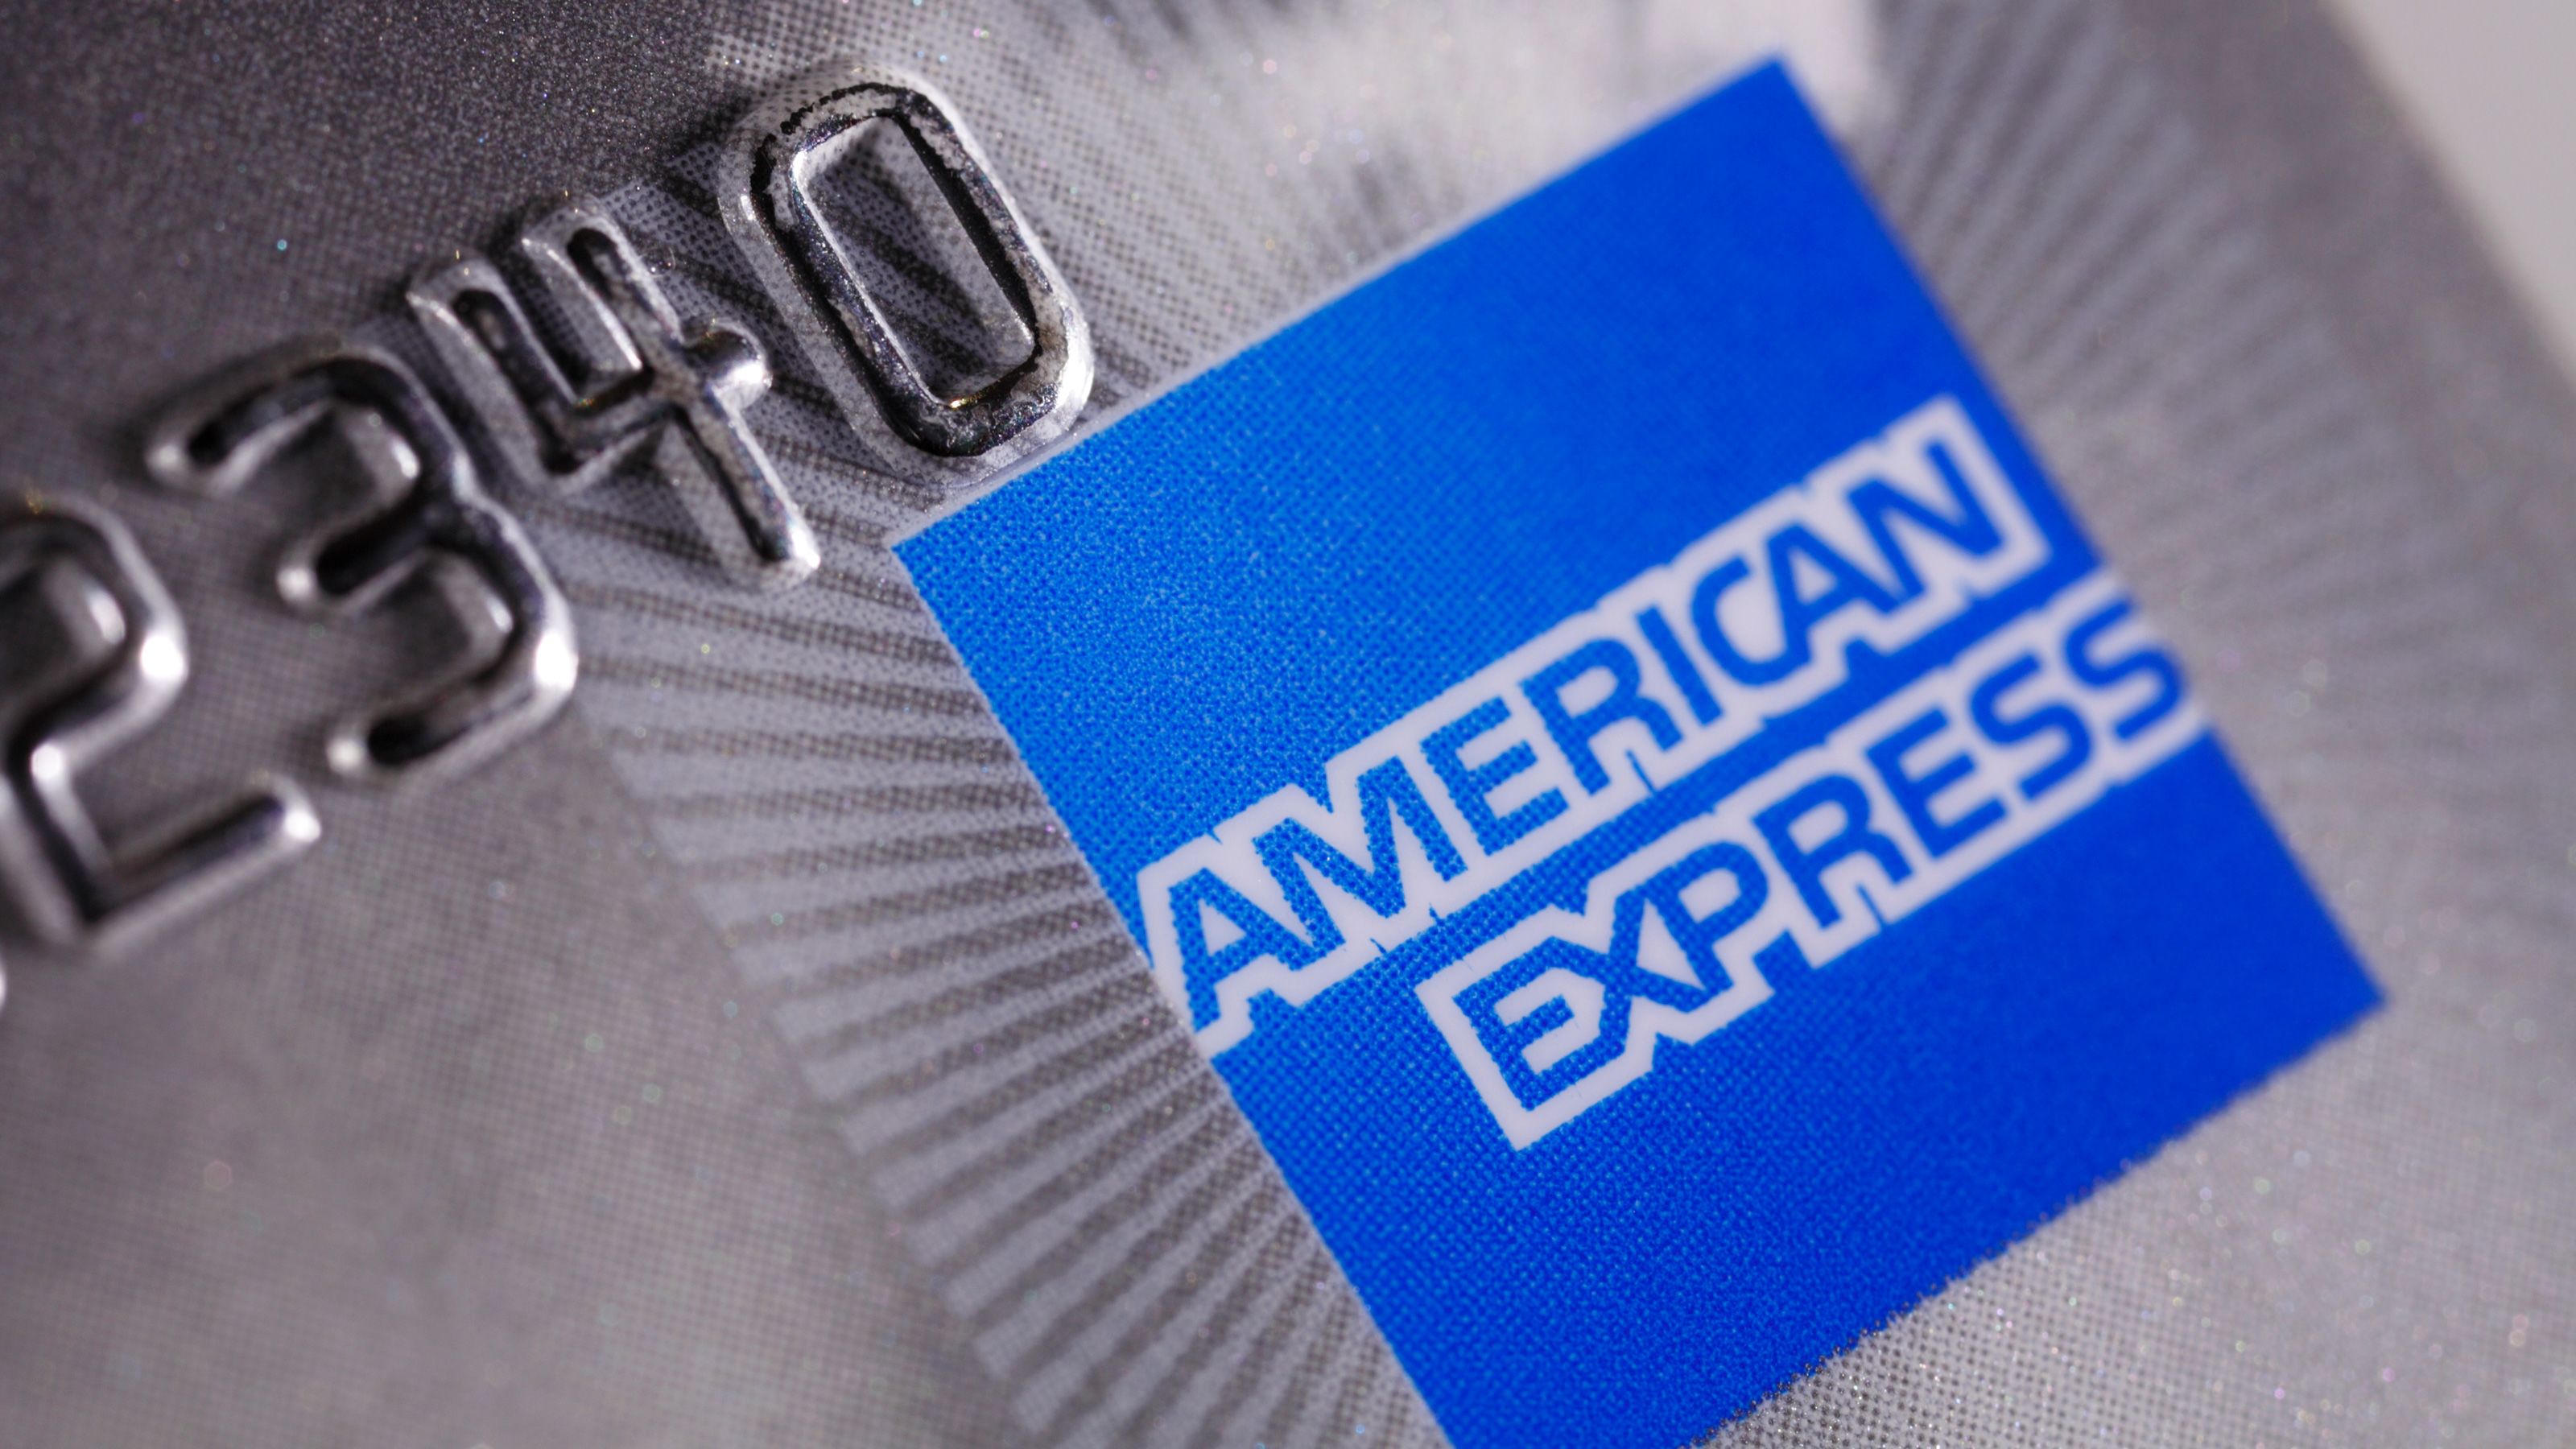 American Express Gold Card Review: More Than Worth It